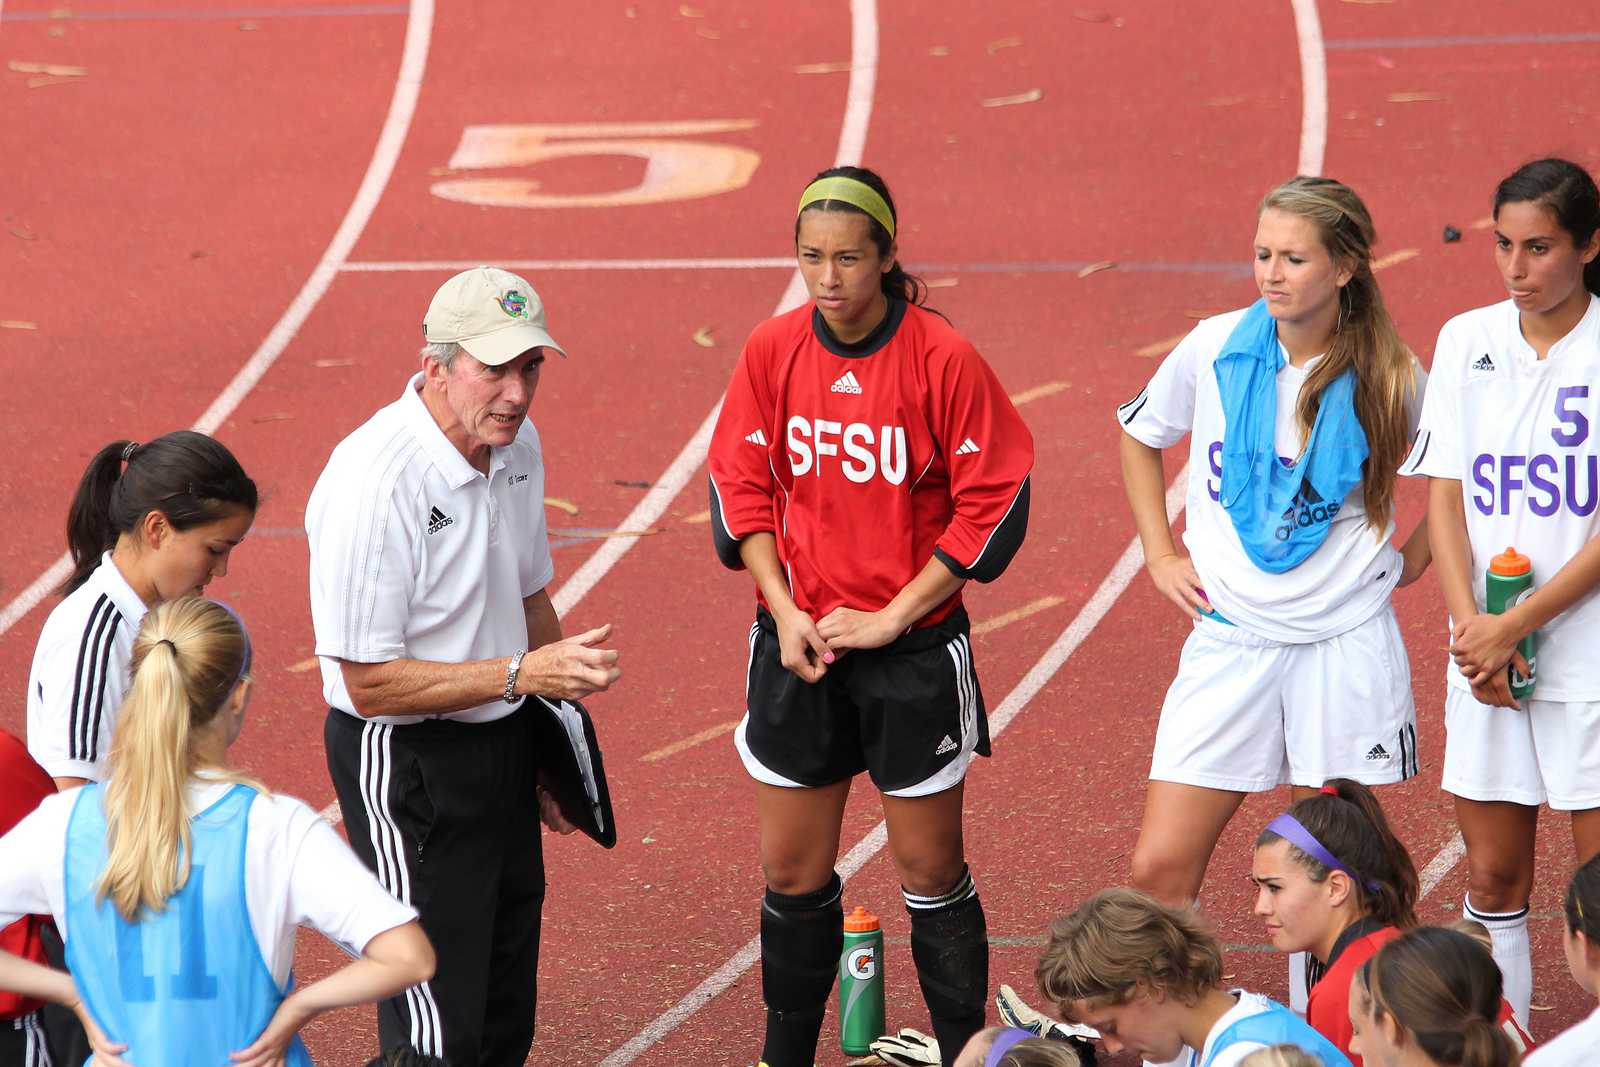 Head Women's Soccer Coach Jack Hyde talks with players during half-time at a game against Cal State Los Angeles at the SF State Cox Stadium on Sept. 20, 2013. Photo Ryan Leibrich / Xpress